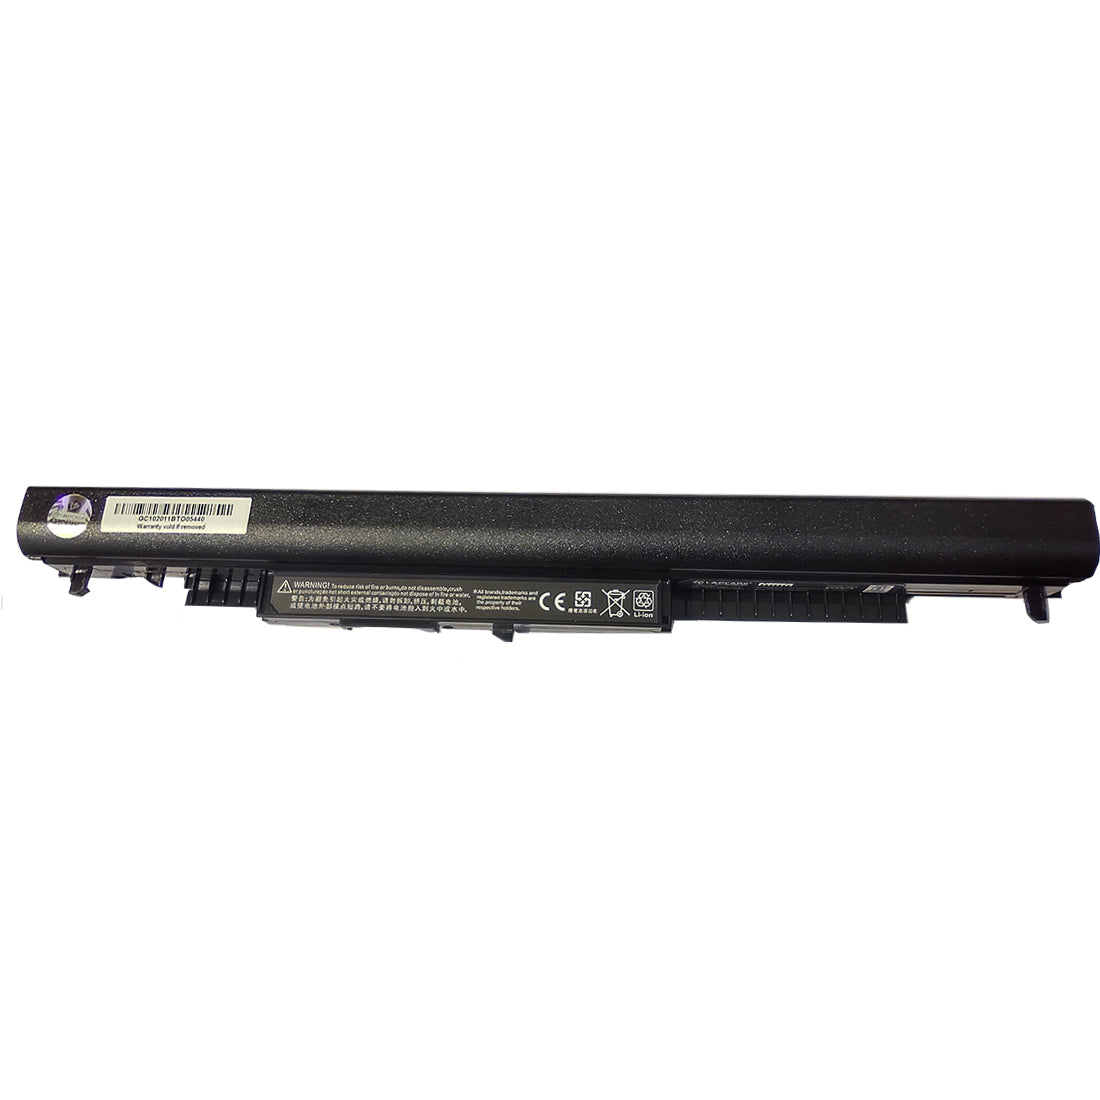 Lapcare_LHOBTS5805_2000mAh_Laptop_Battery_From_The_Peripheral_Store